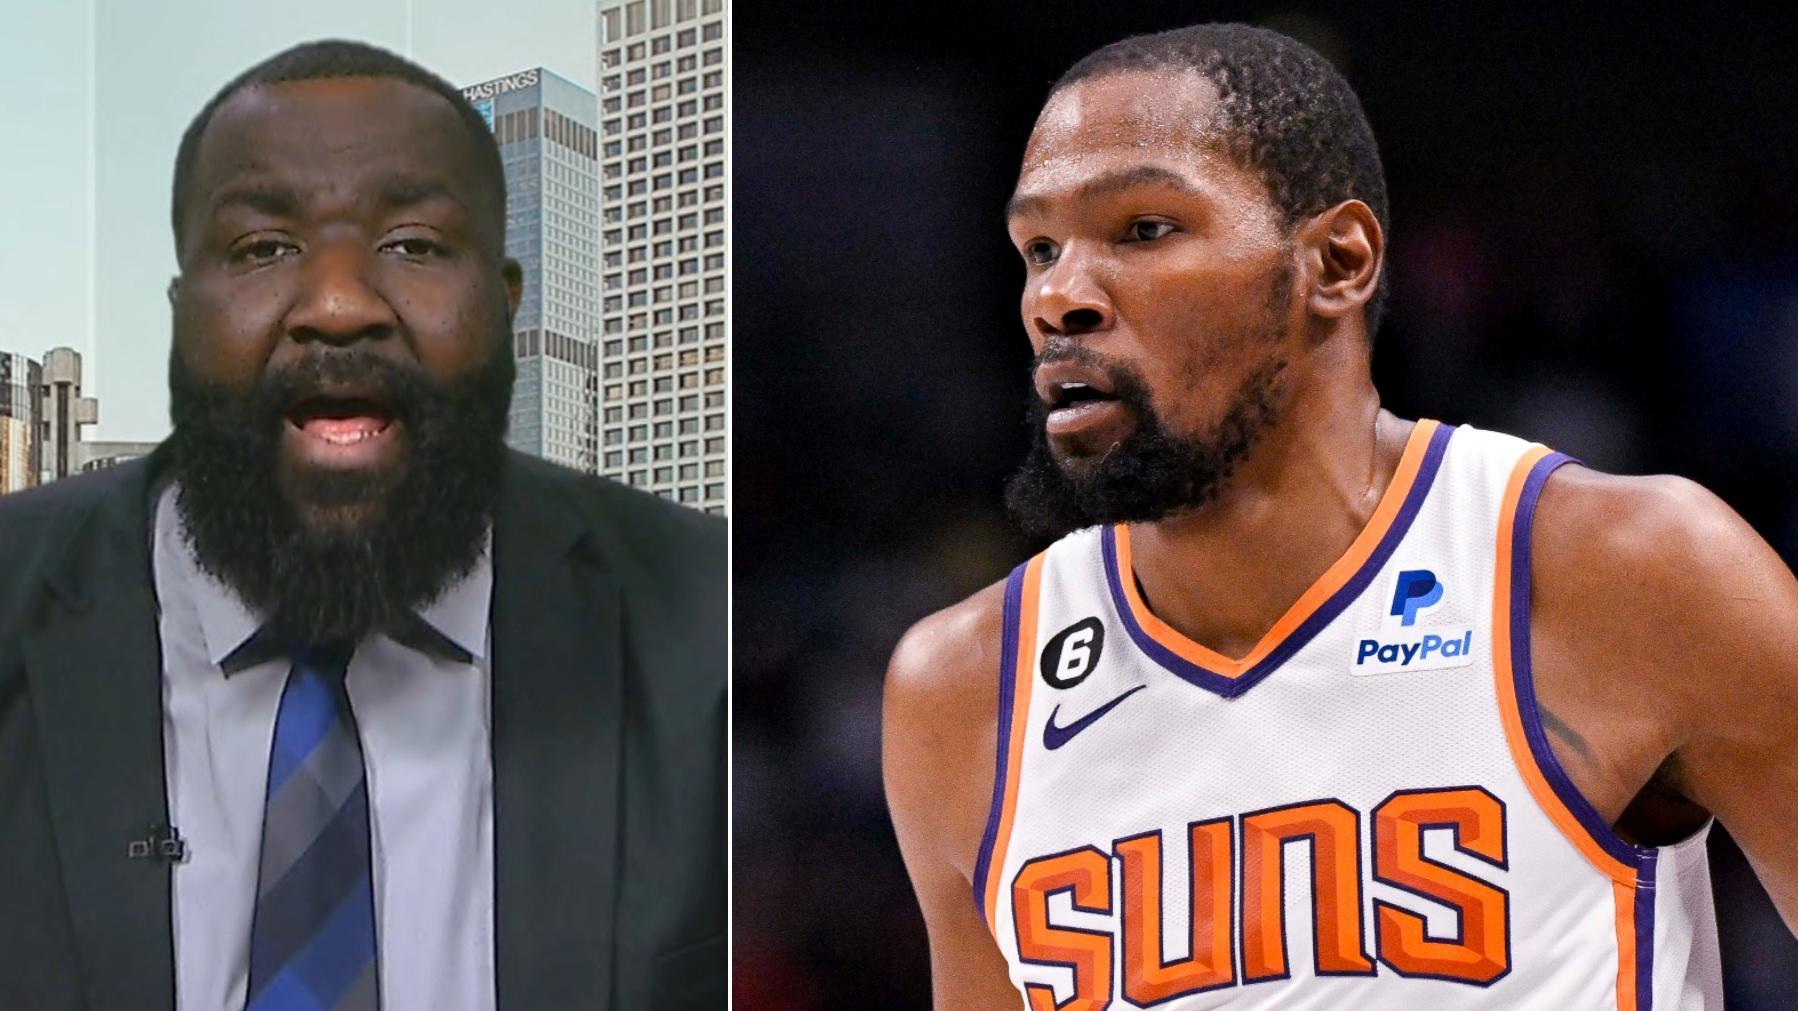 Perk isn't buying KD's claims about his legacy